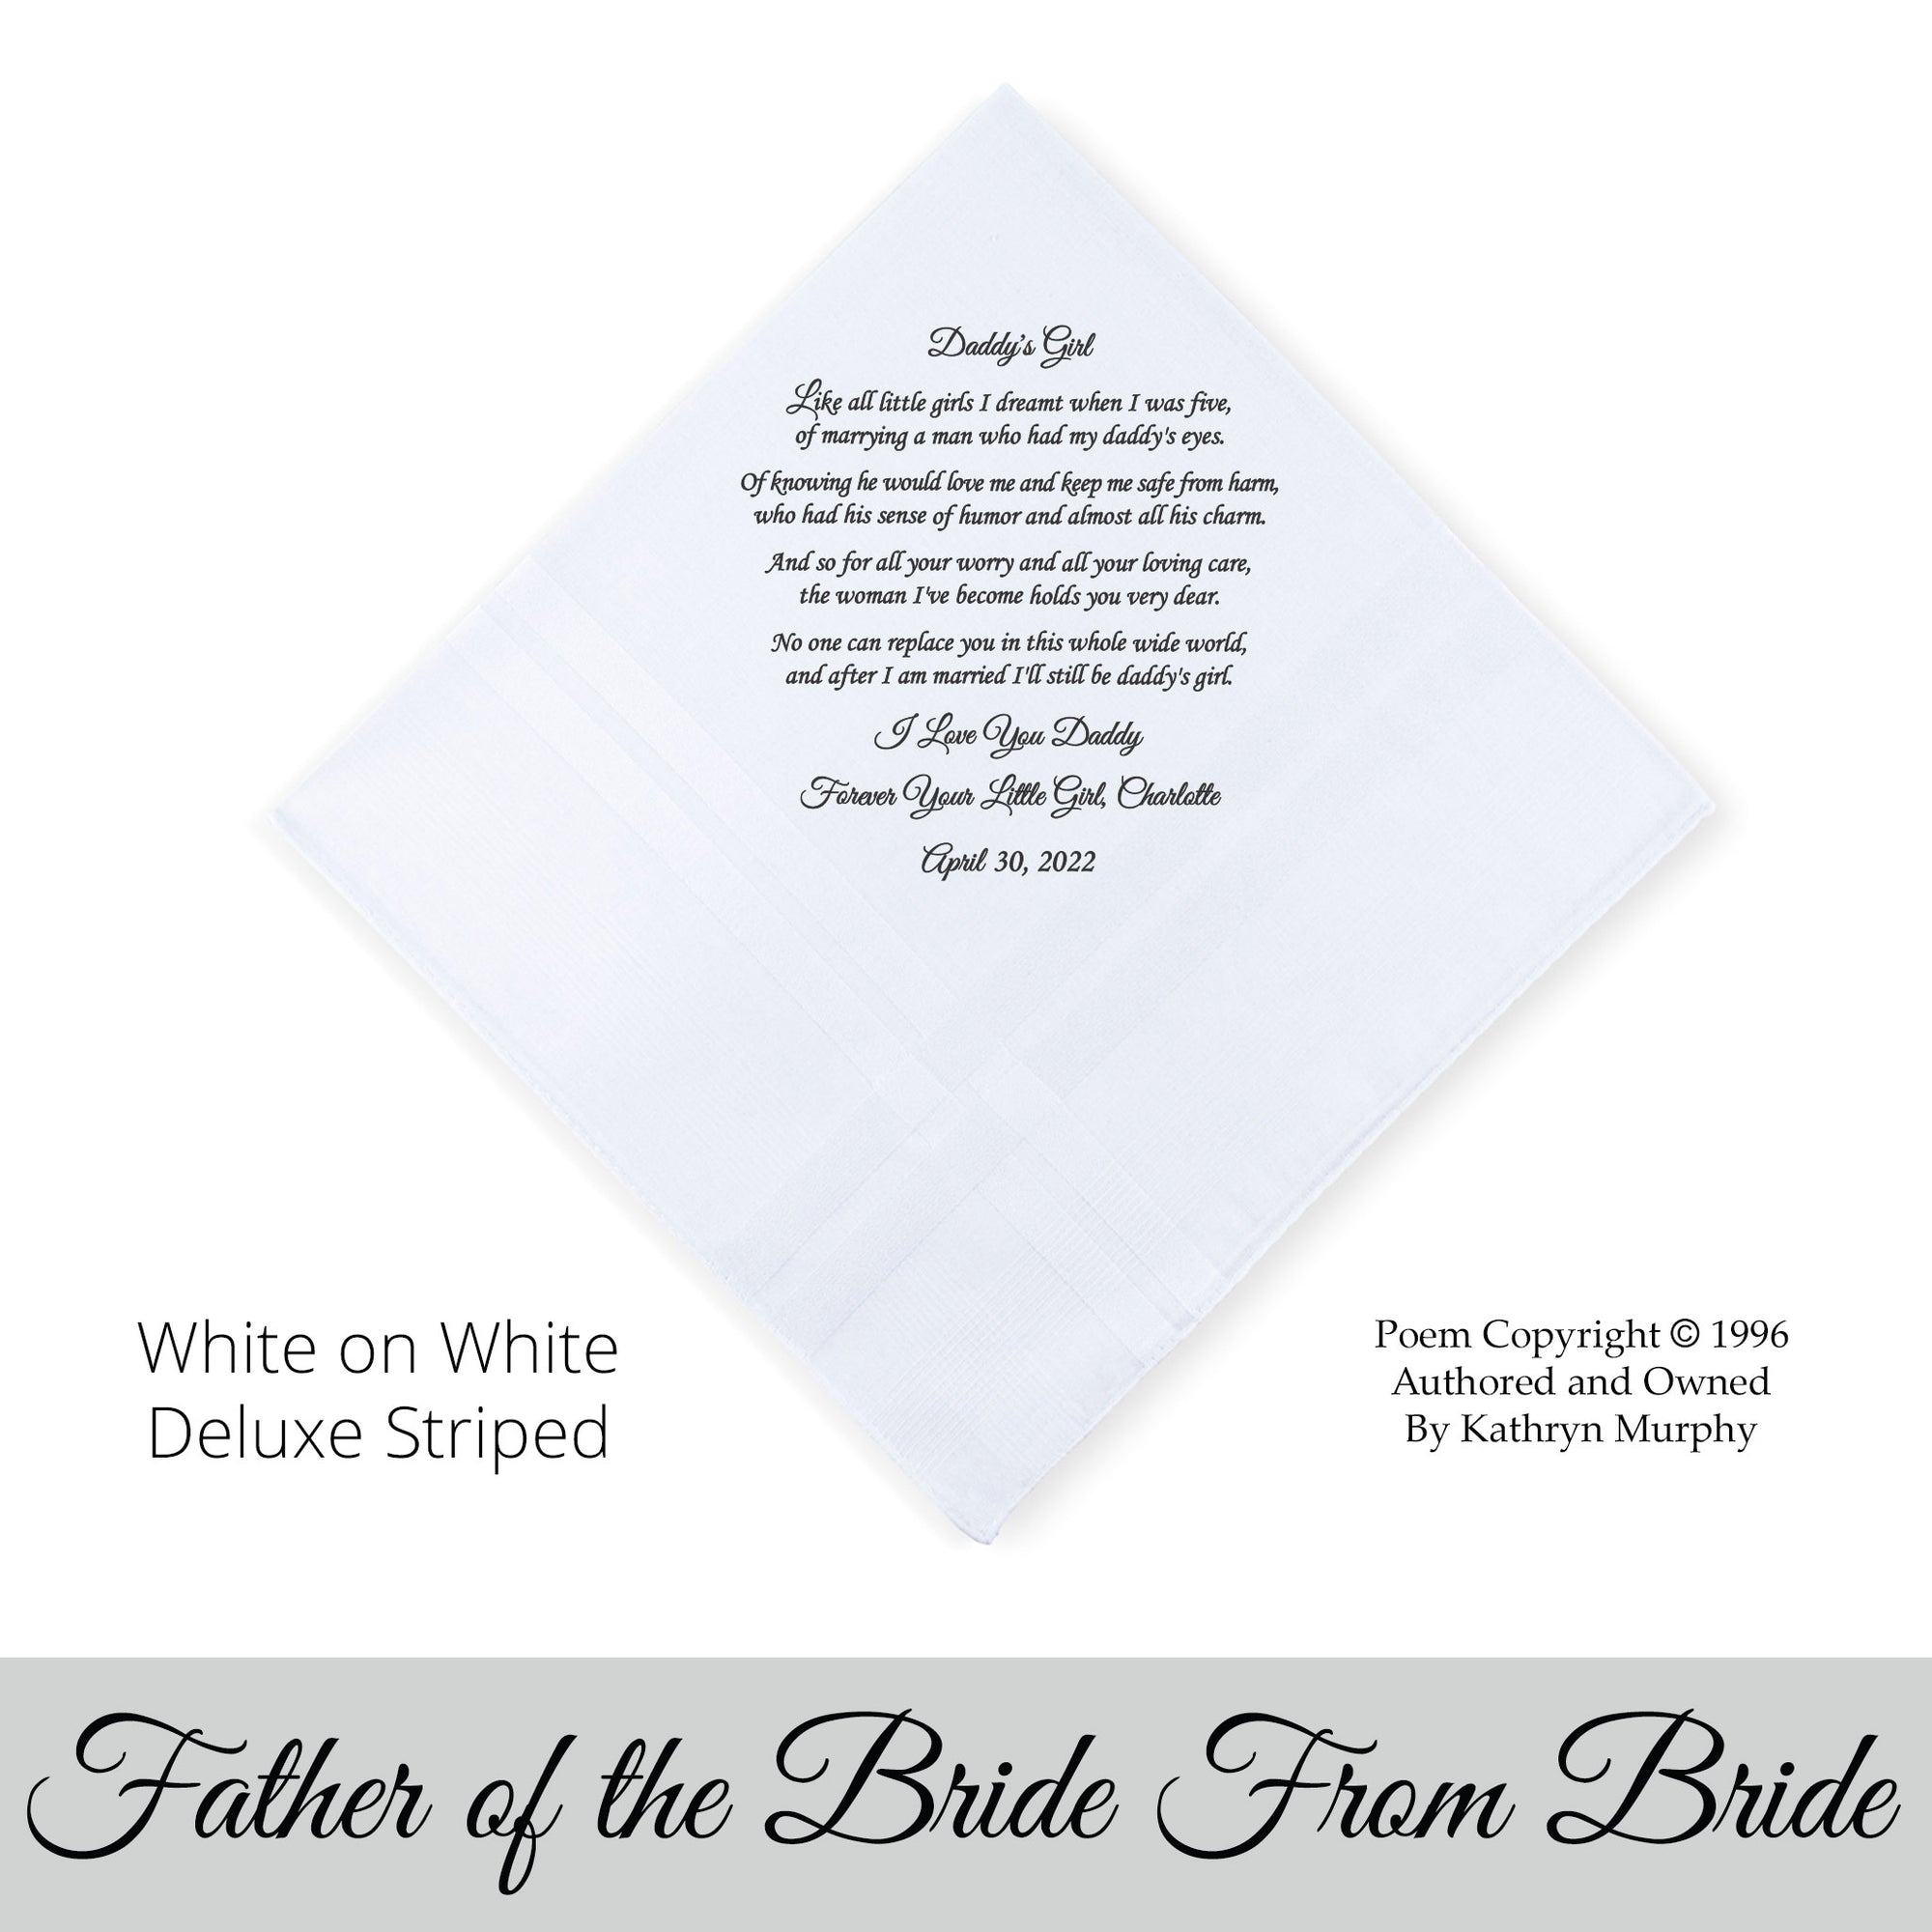 Father of the Bride Handkerchief "daddy's girl"